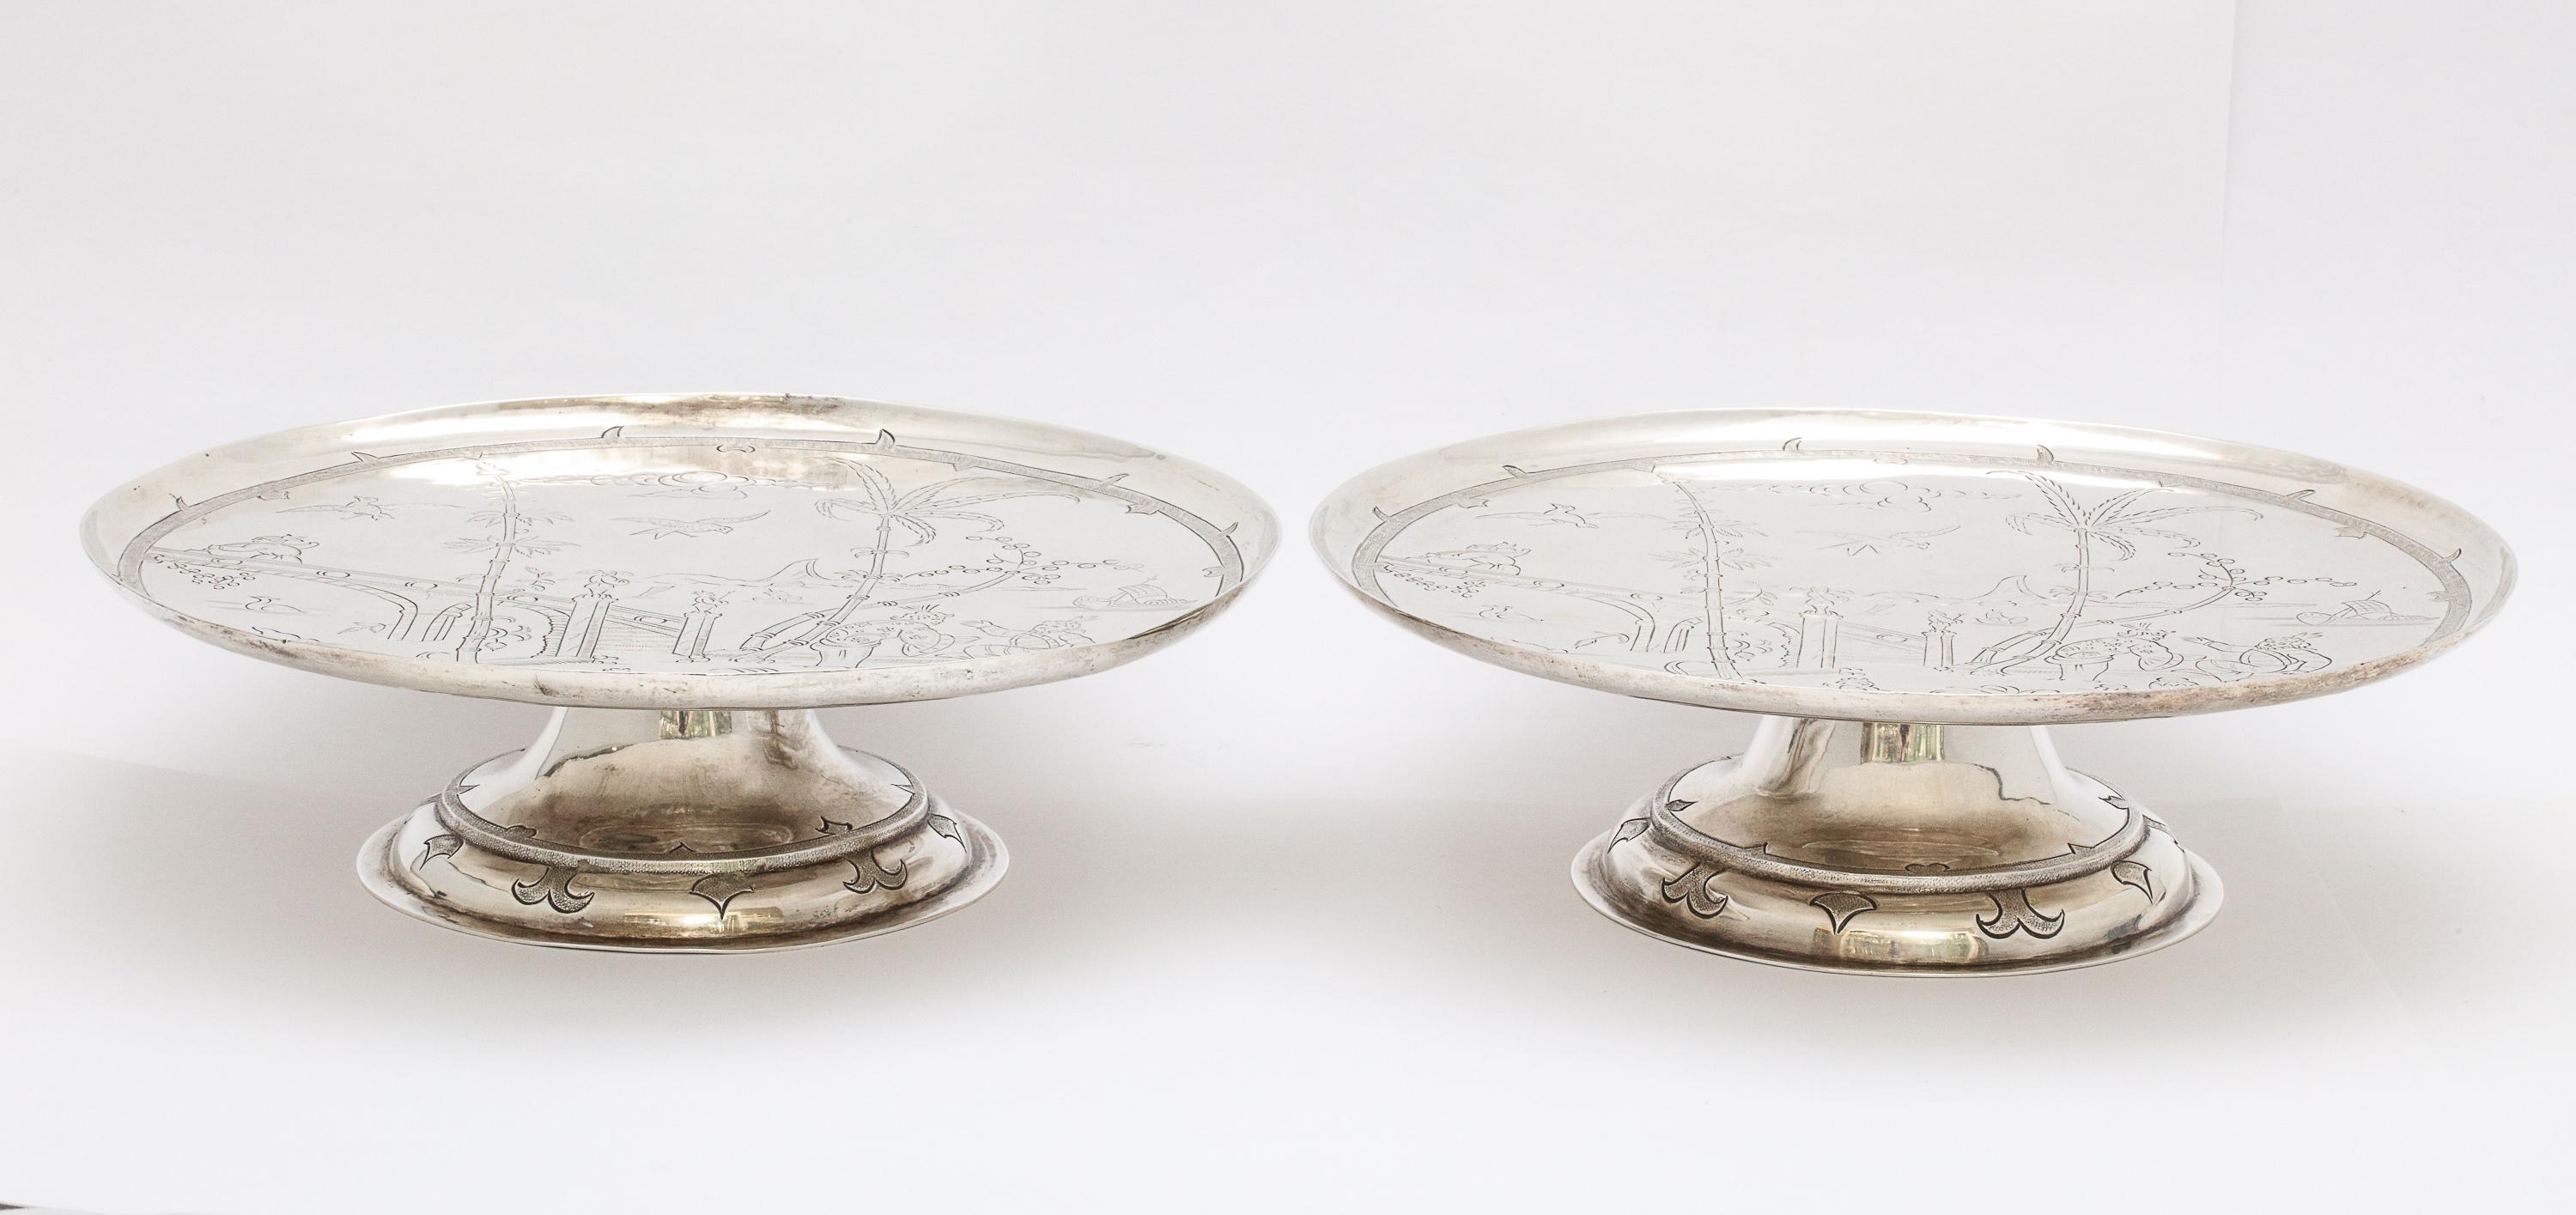 Pair of Edwardian Chinoiserie-Style Sterling Silver Tazzas by Crichton 13